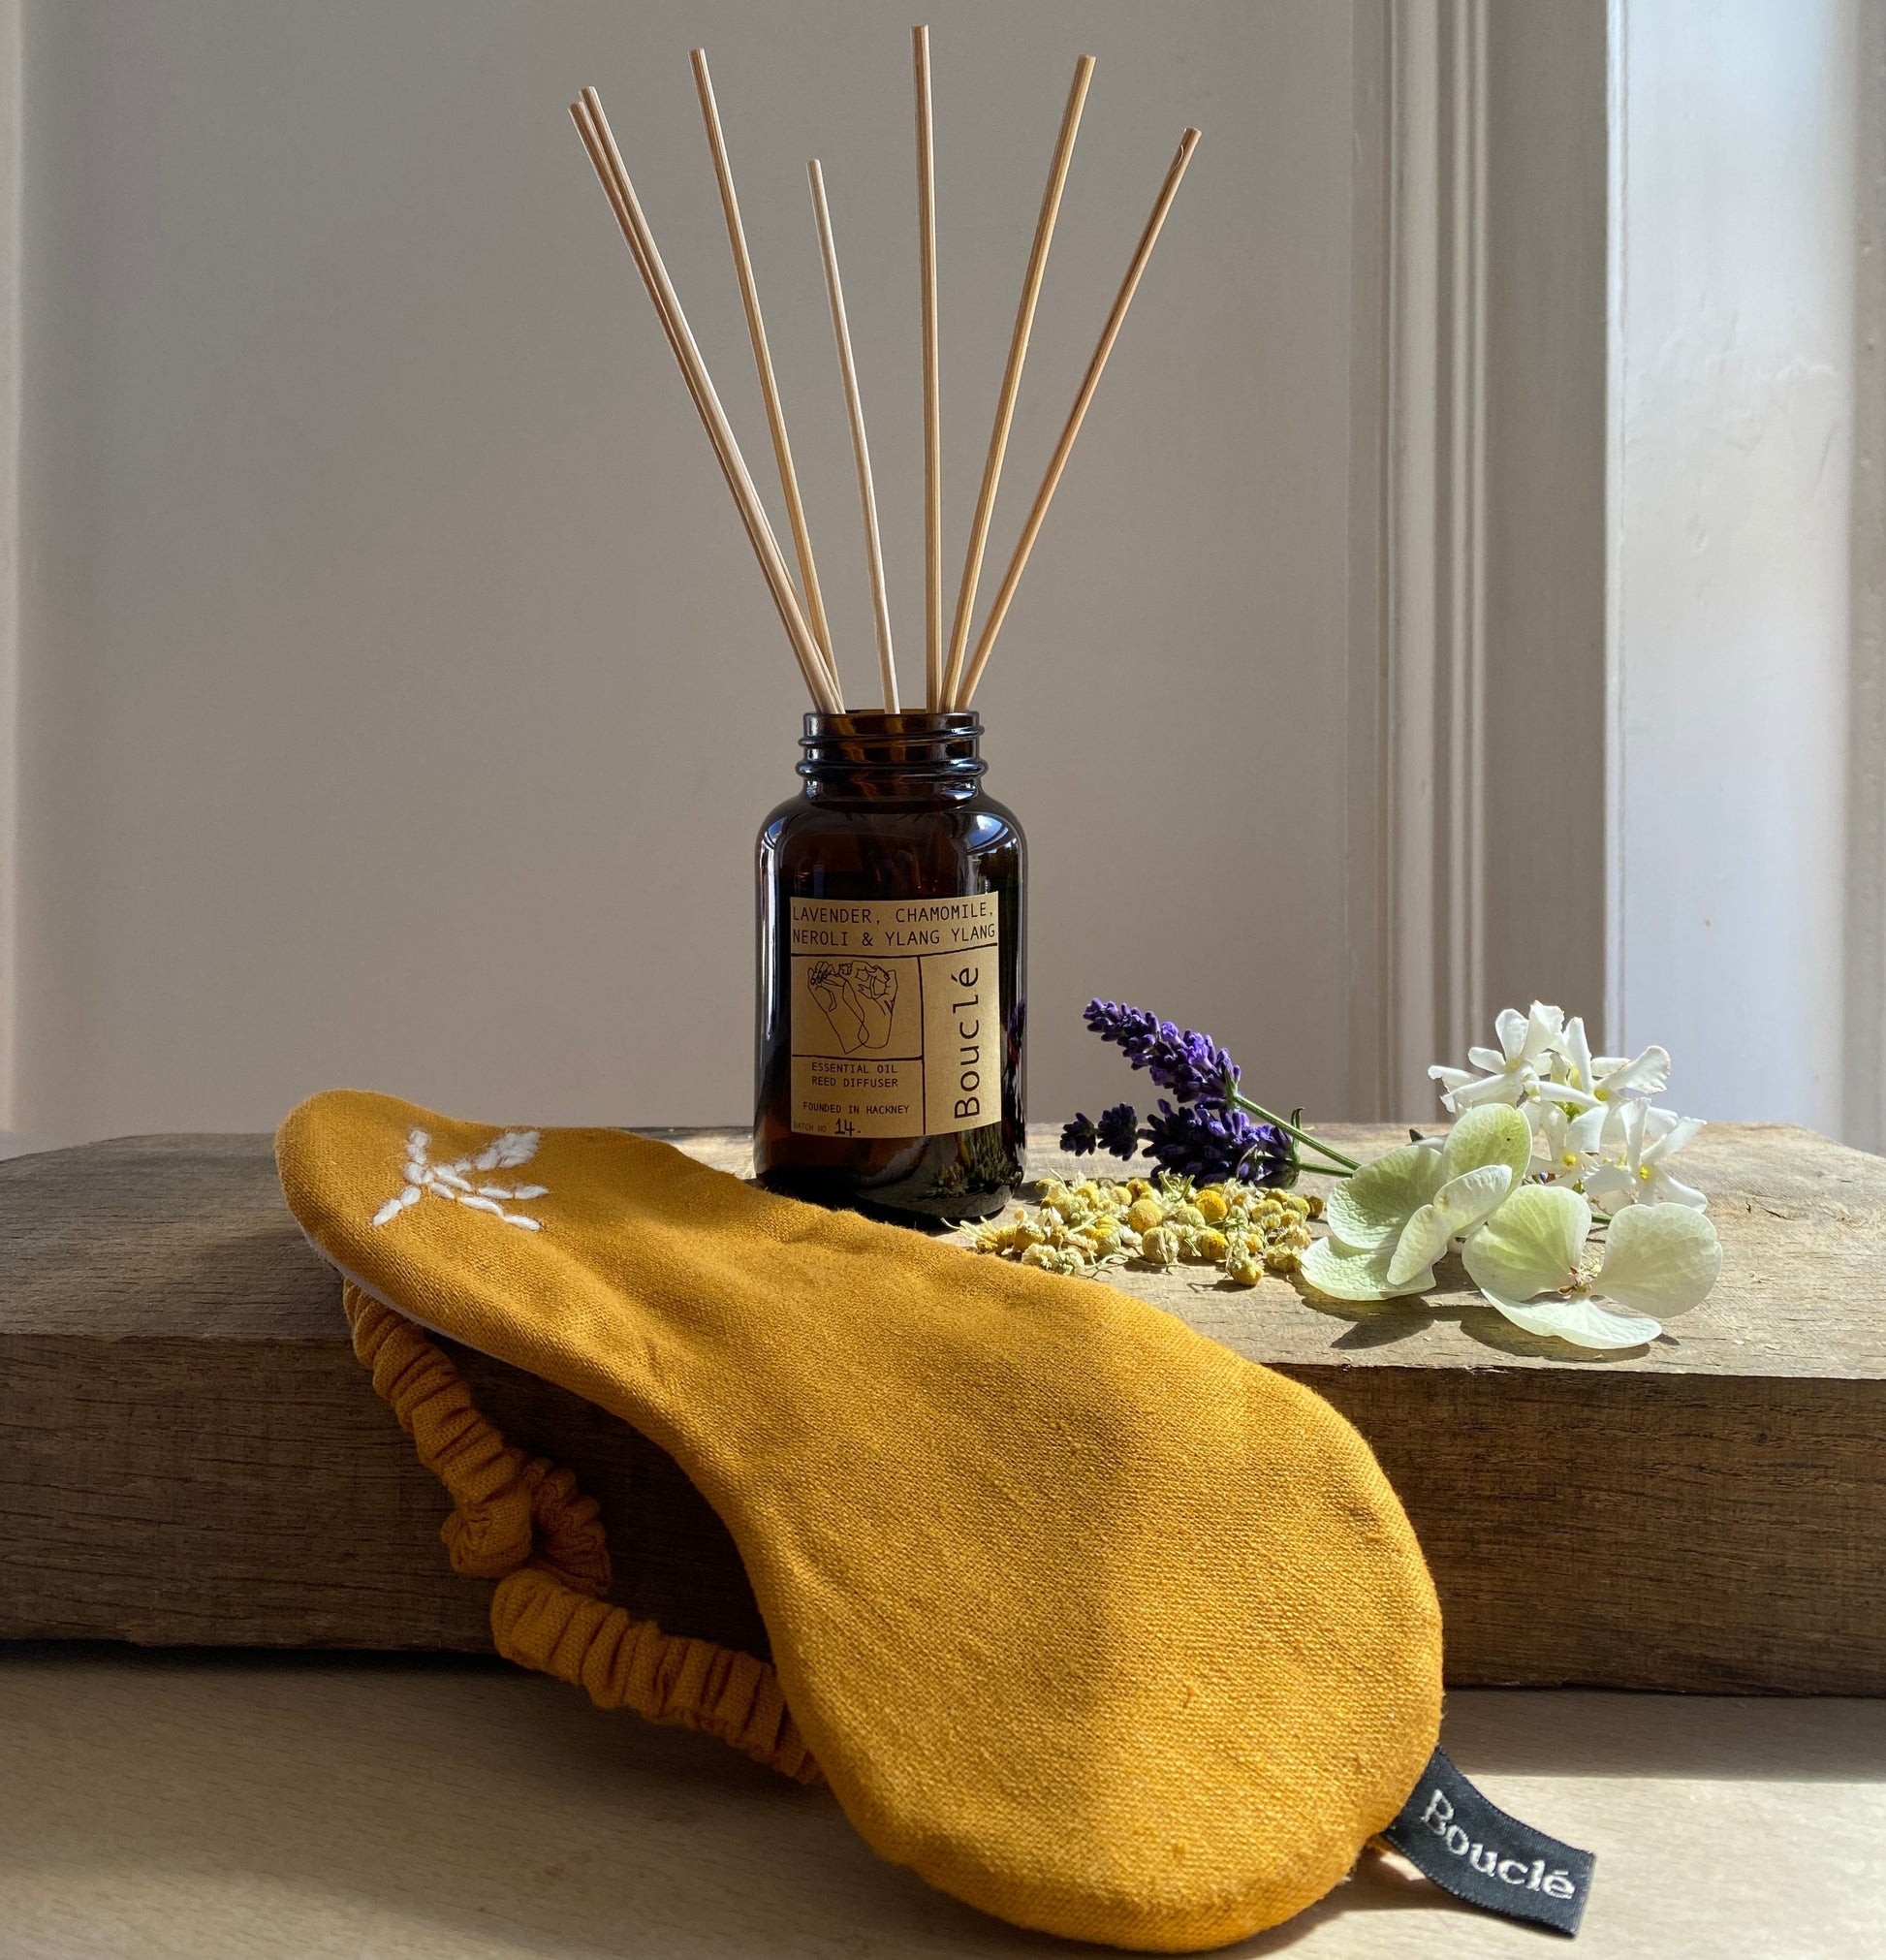 Natural ingredients alongside the floral calming reed diffuser and hand embroidered eye mask.